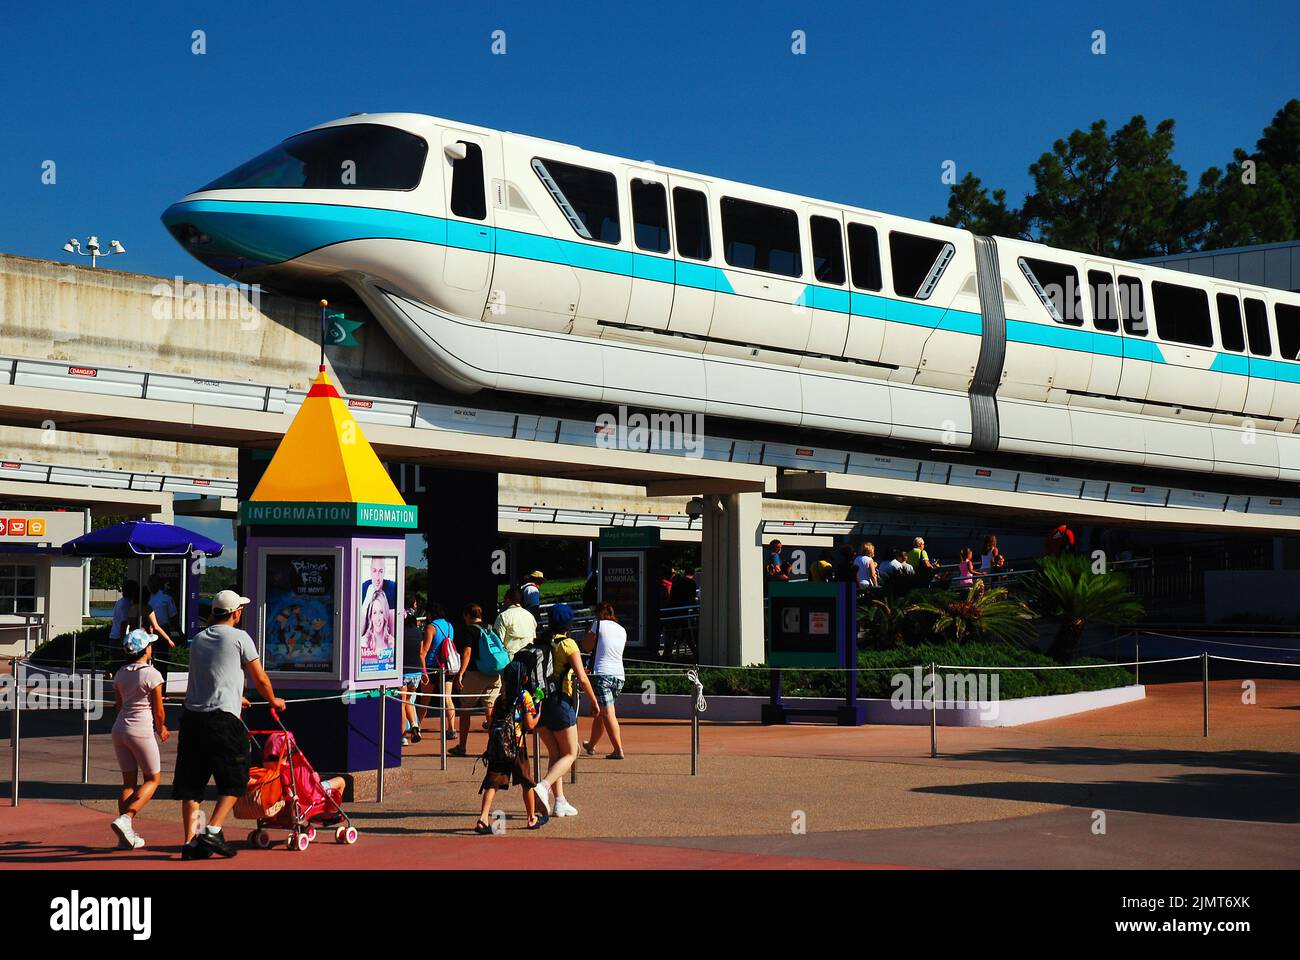 The Walk Disney World monorail pulls into a station as families begin  their day heading to the magic Kingdom for a fun filled vacation Stock Photo